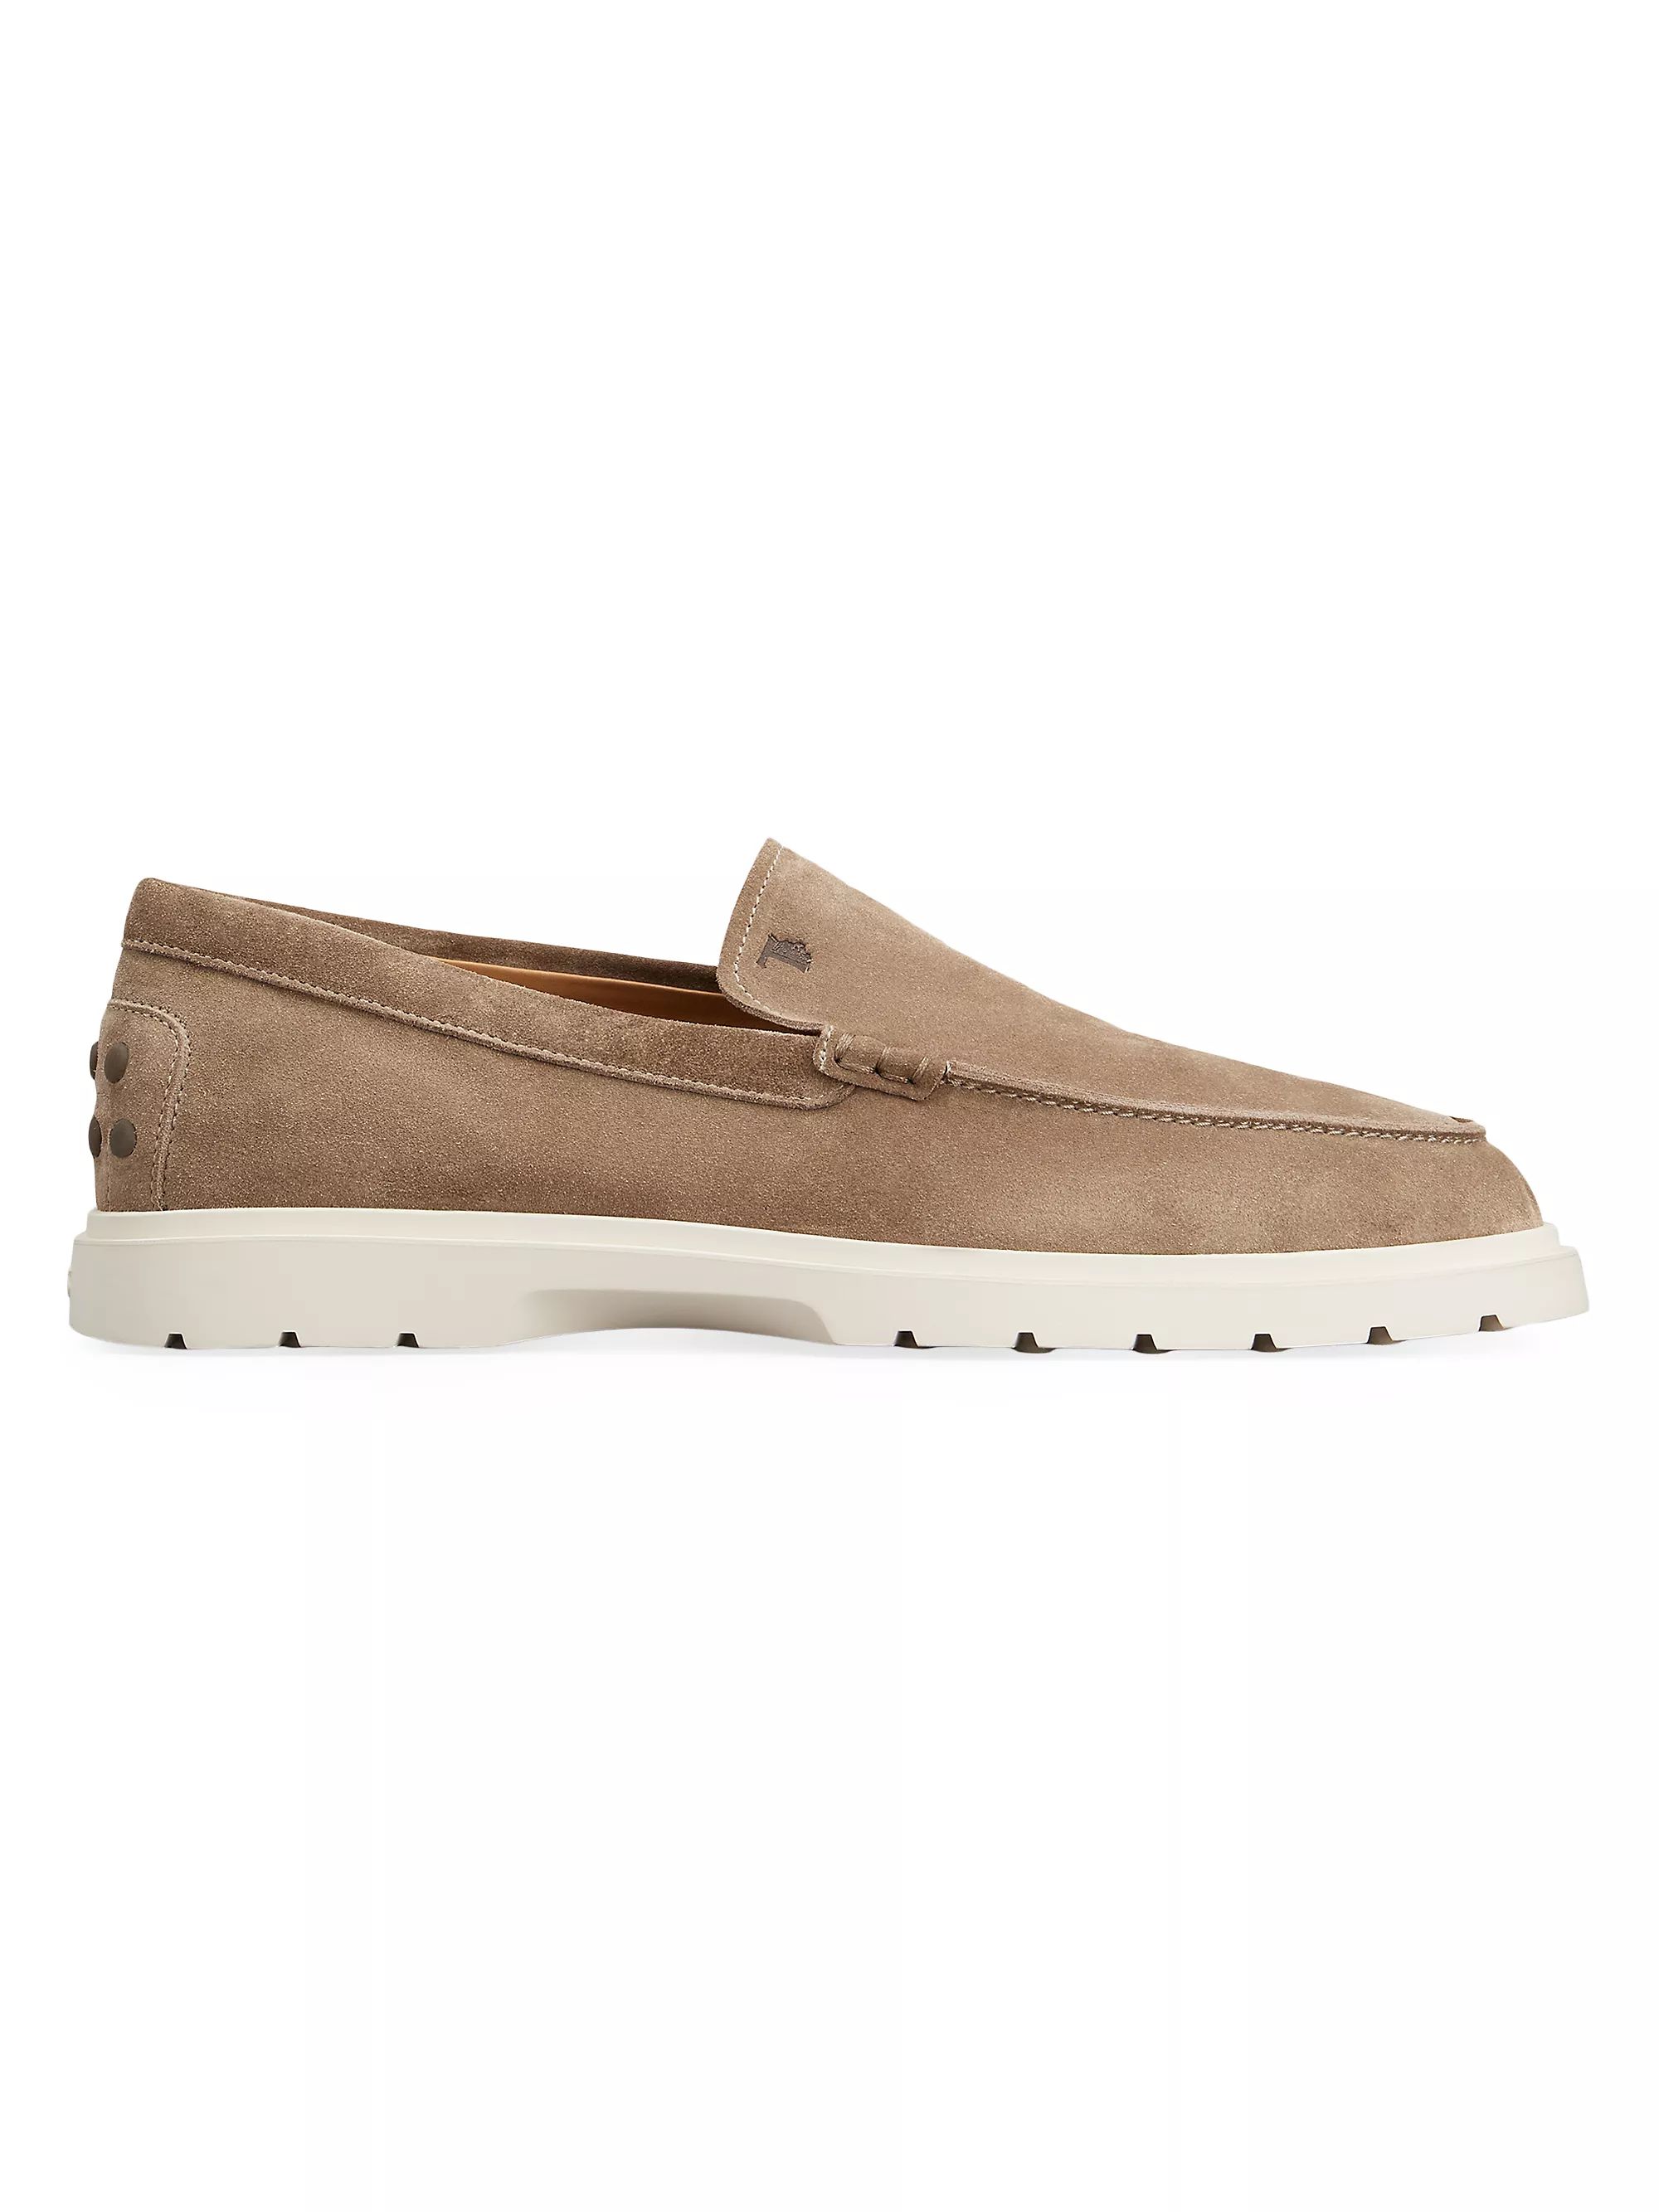 Shop Tod's Suede Round-Toe Loafers | Saks Fifth Avenue | Saks Fifth Avenue